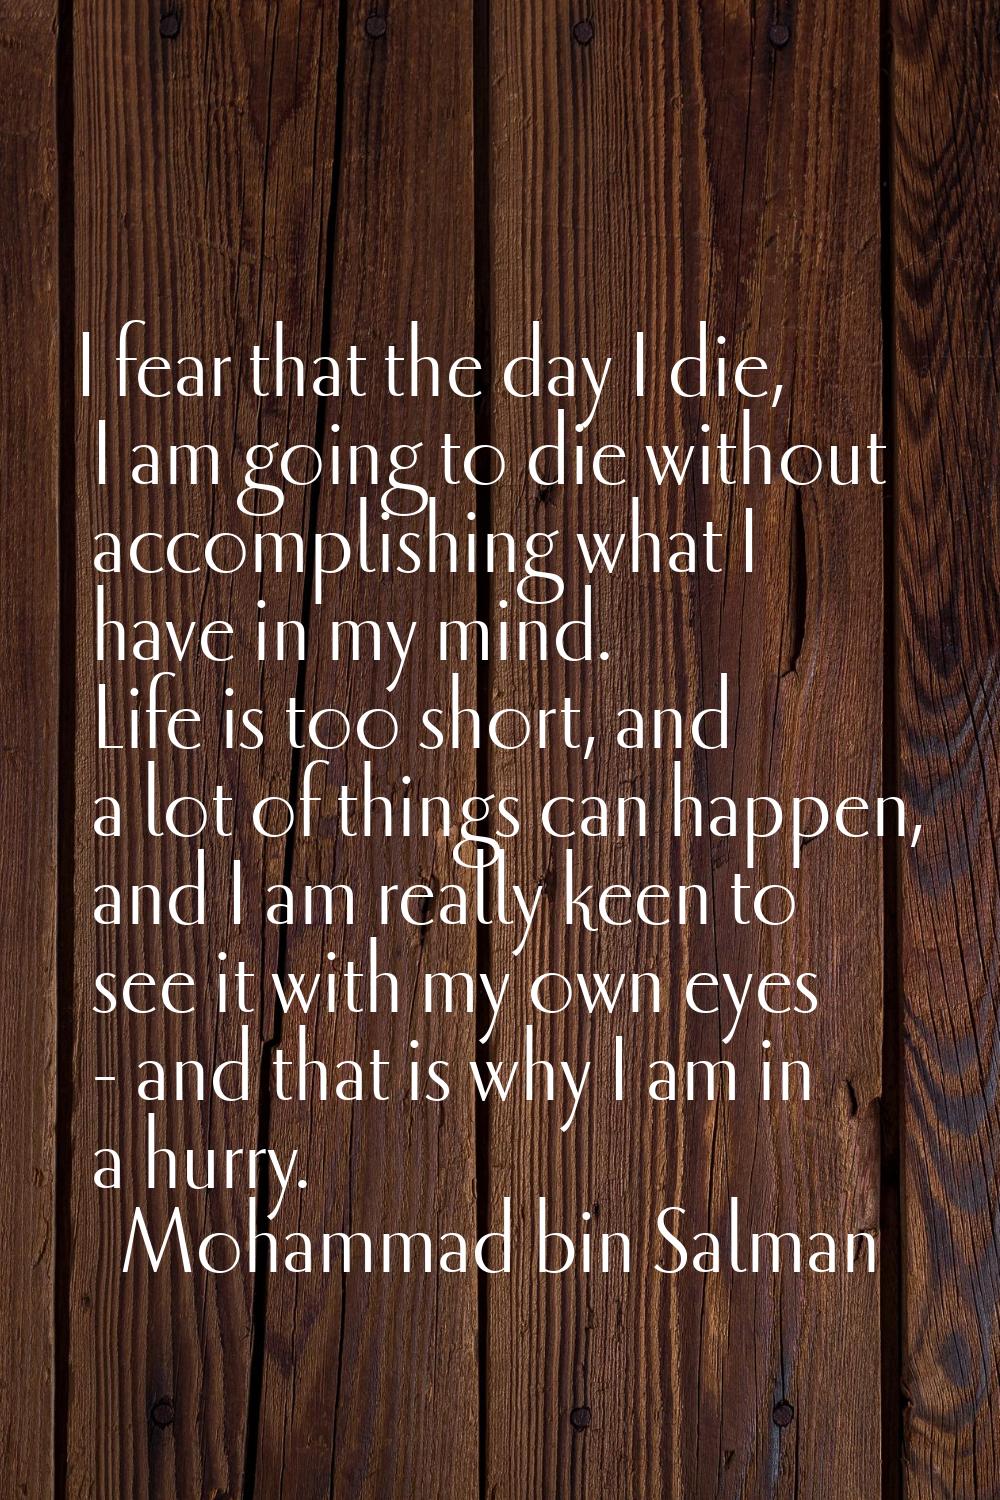 I fear that the day I die, I am going to die without accomplishing what I have in my mind. Life is 